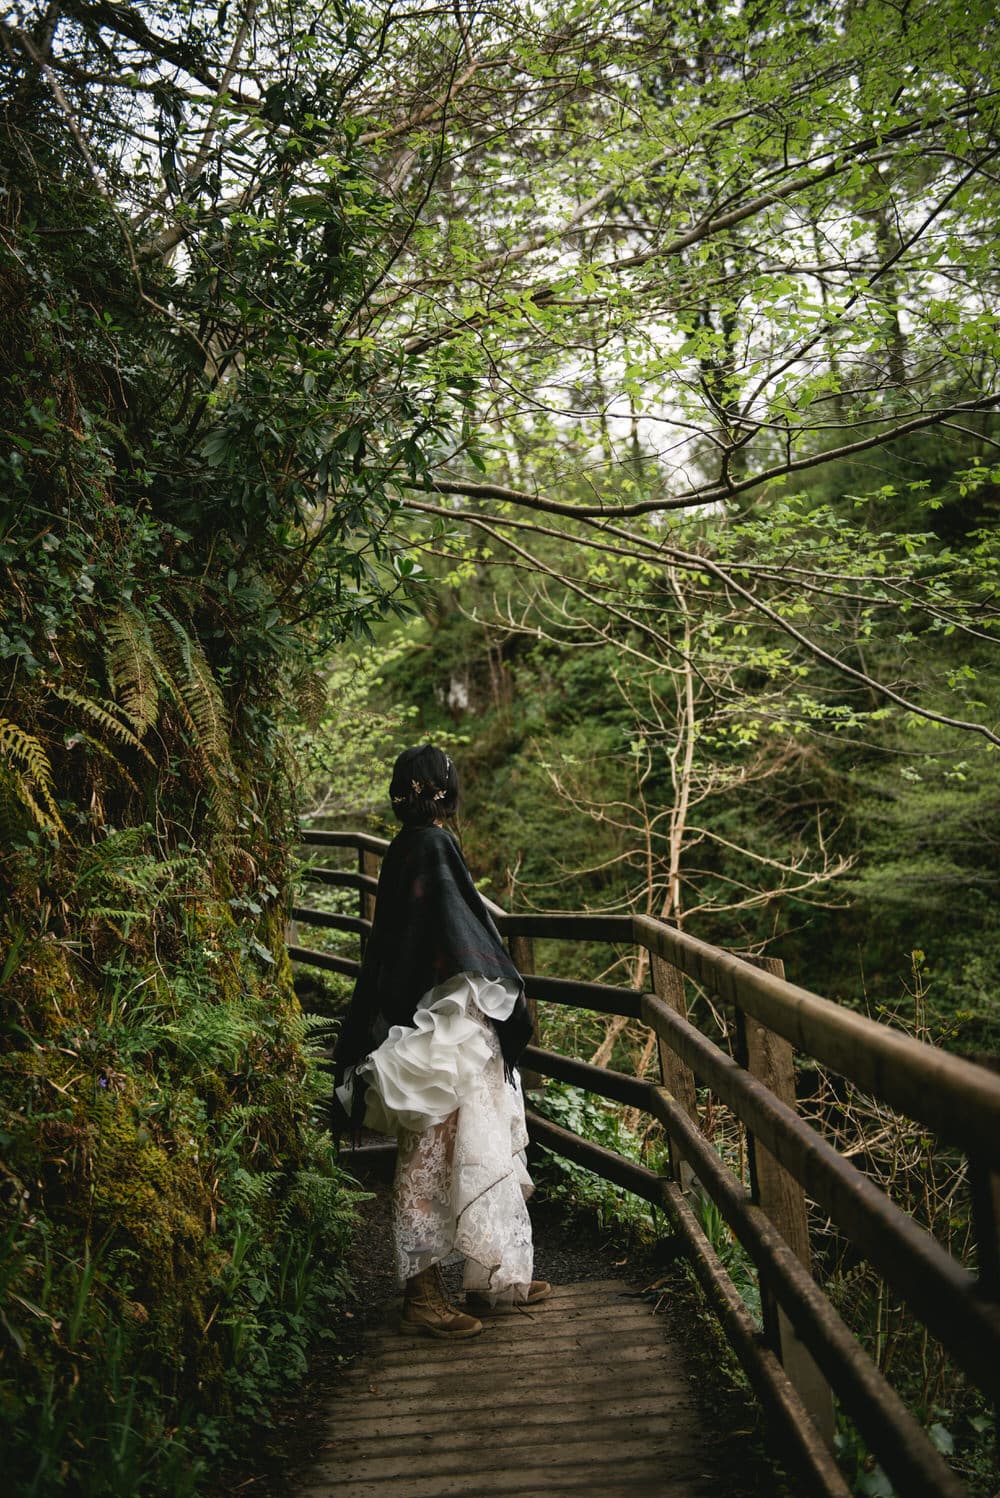 The couple laughing together as they explore the enchanting forest during their Northern Ireland elopement.